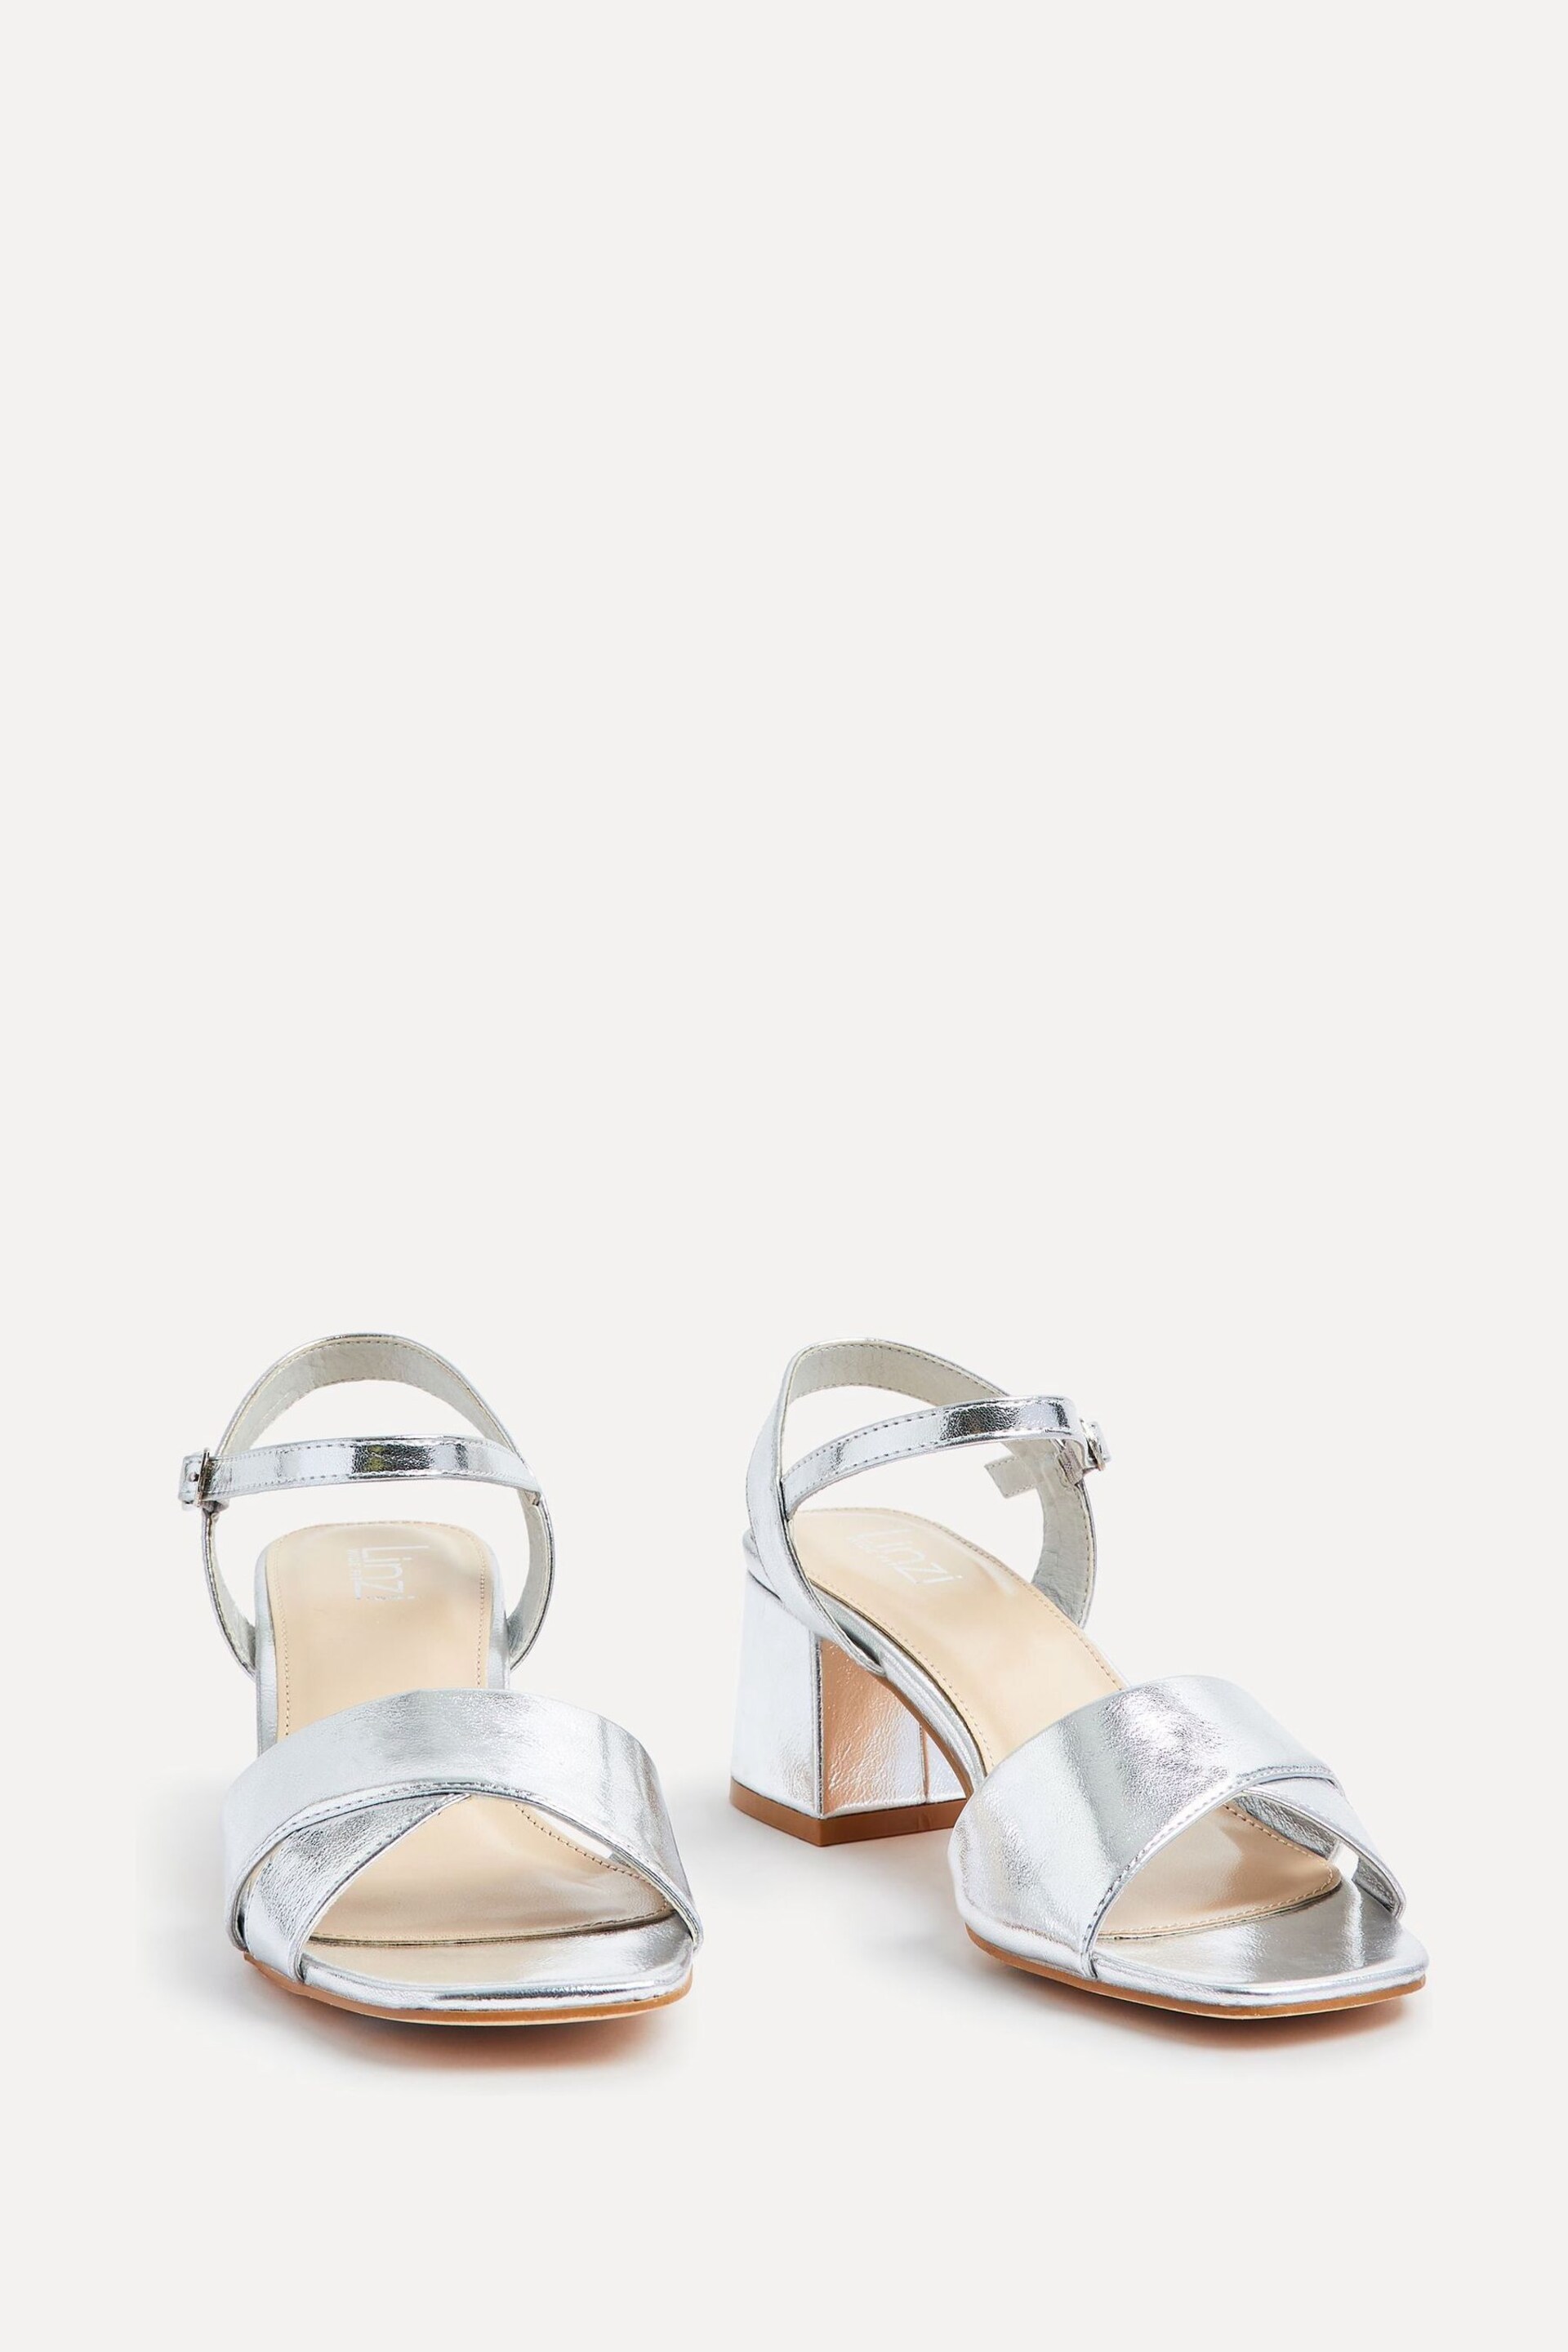 Linzi Silver Vivian Wide Fit Heeled Sandals With Crossover Front Strap - Image 3 of 5